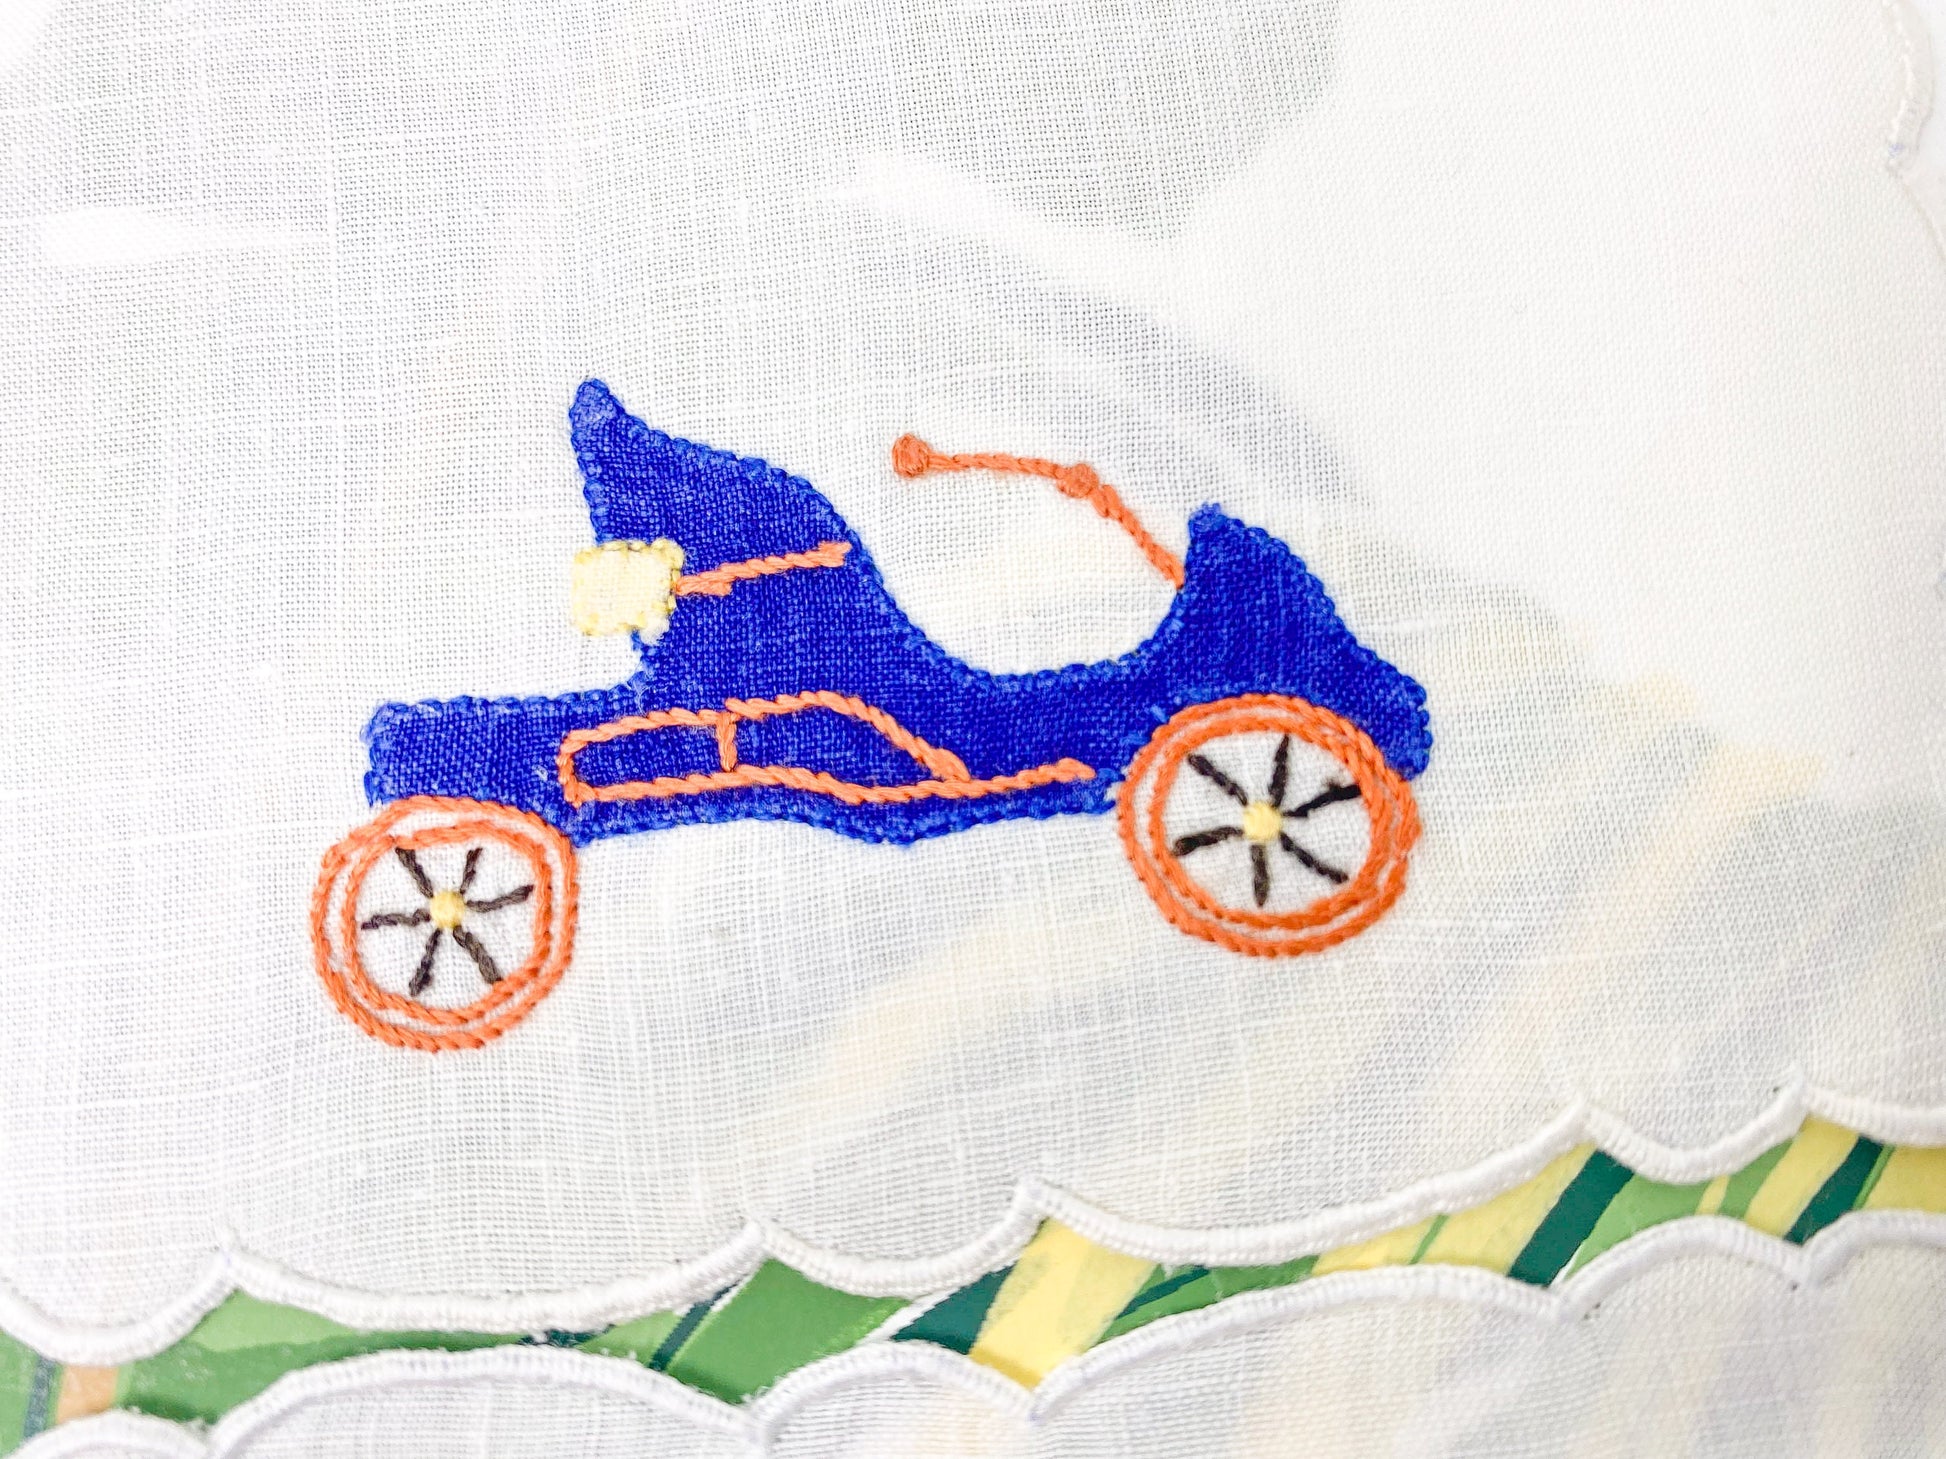 Set of 6 Embroidered Classic Car Madeira Cocktail Napkins